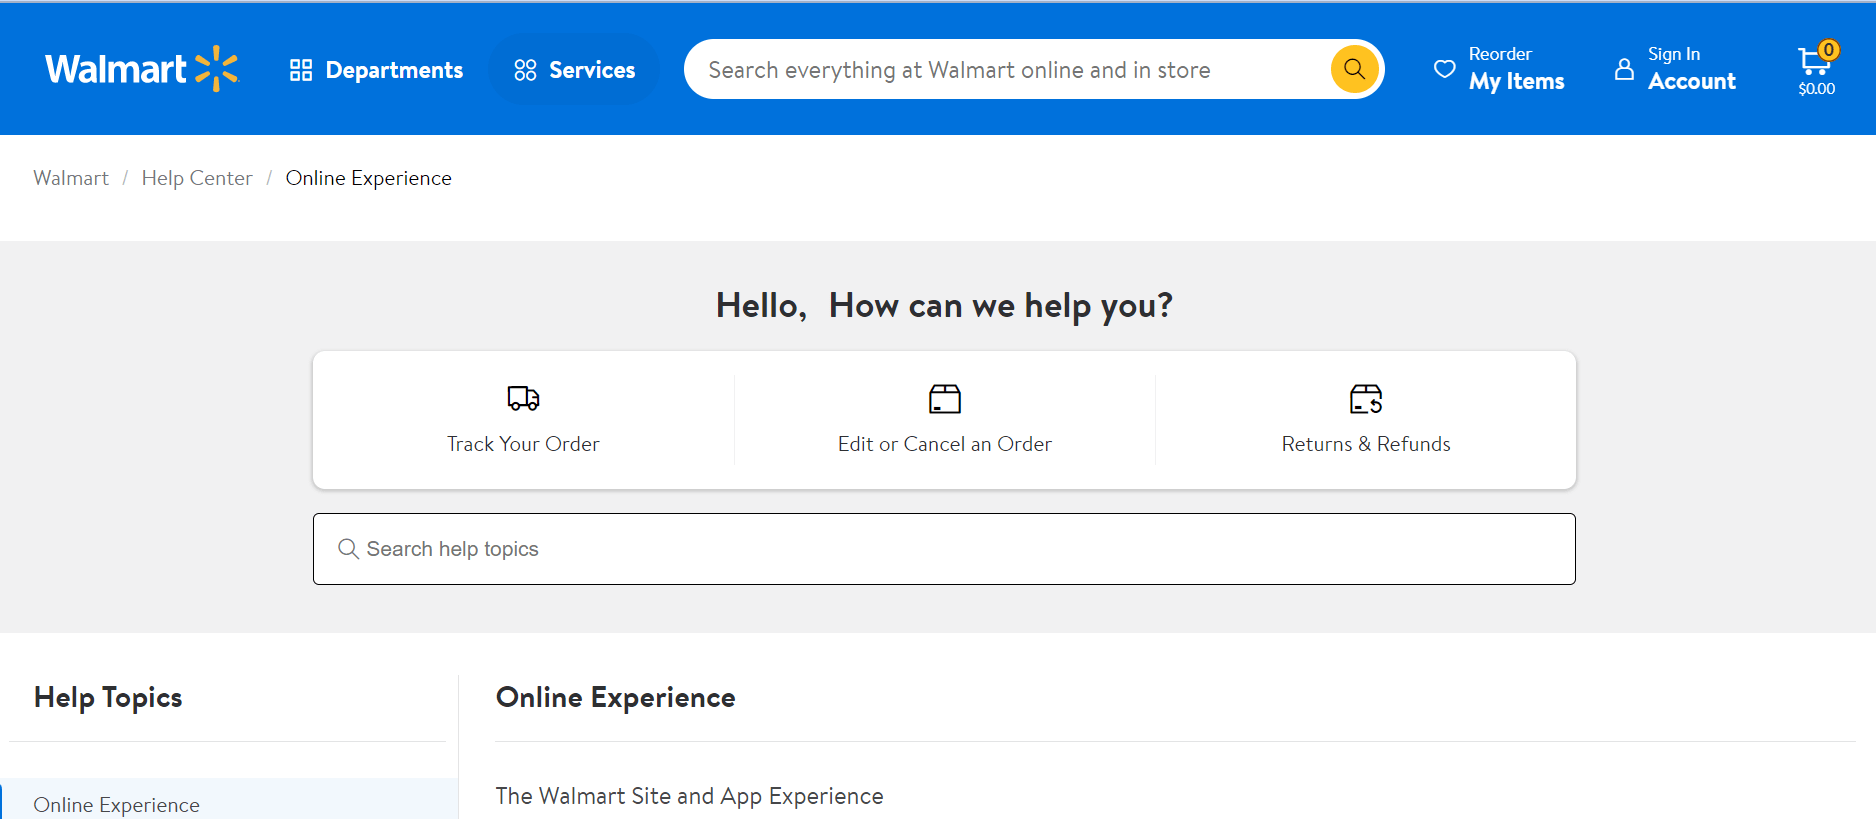 Contact Walmart customer support to fix the Walmart app Not Working, down or having other issues